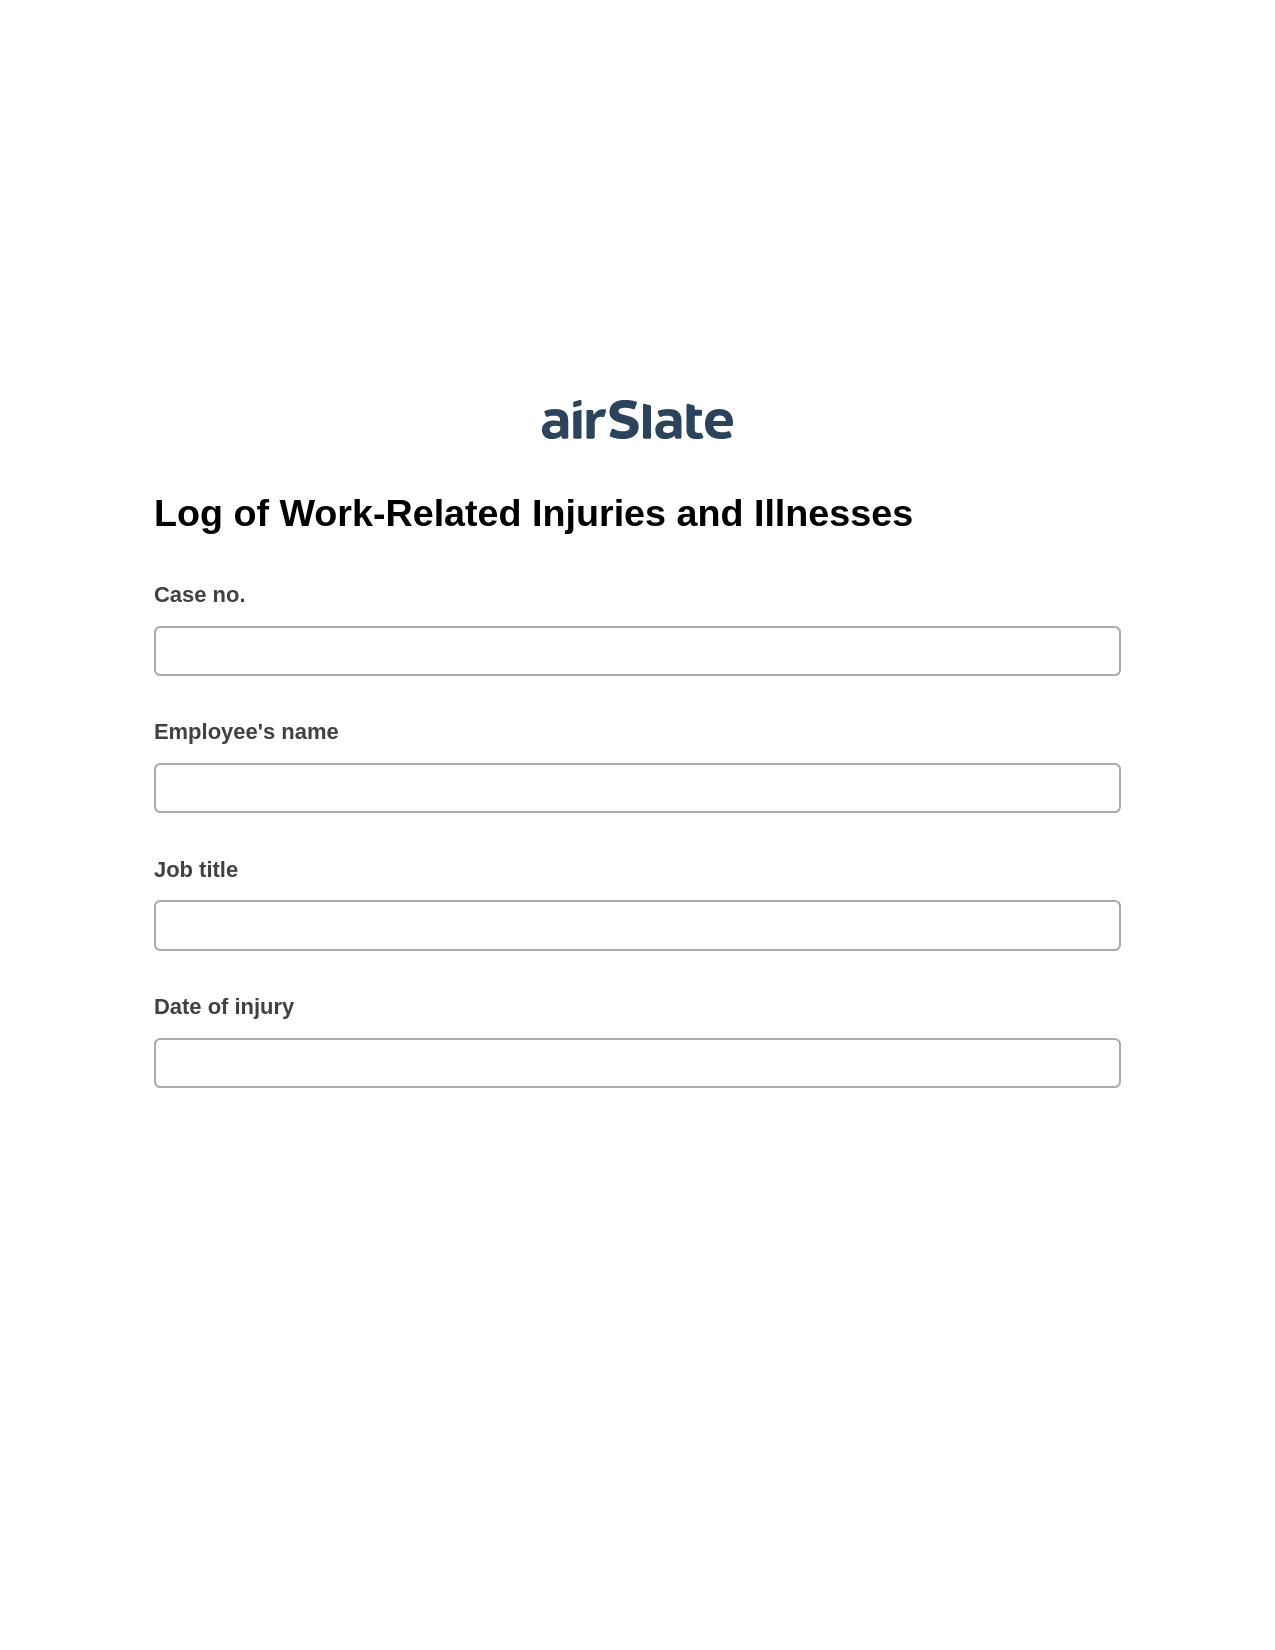 Log of Work-Related Injuries and Illnesses Pre-fill from Salesforce Record Bot, System Bot - Create a Slate in another Flow, Export to MySQL Bot